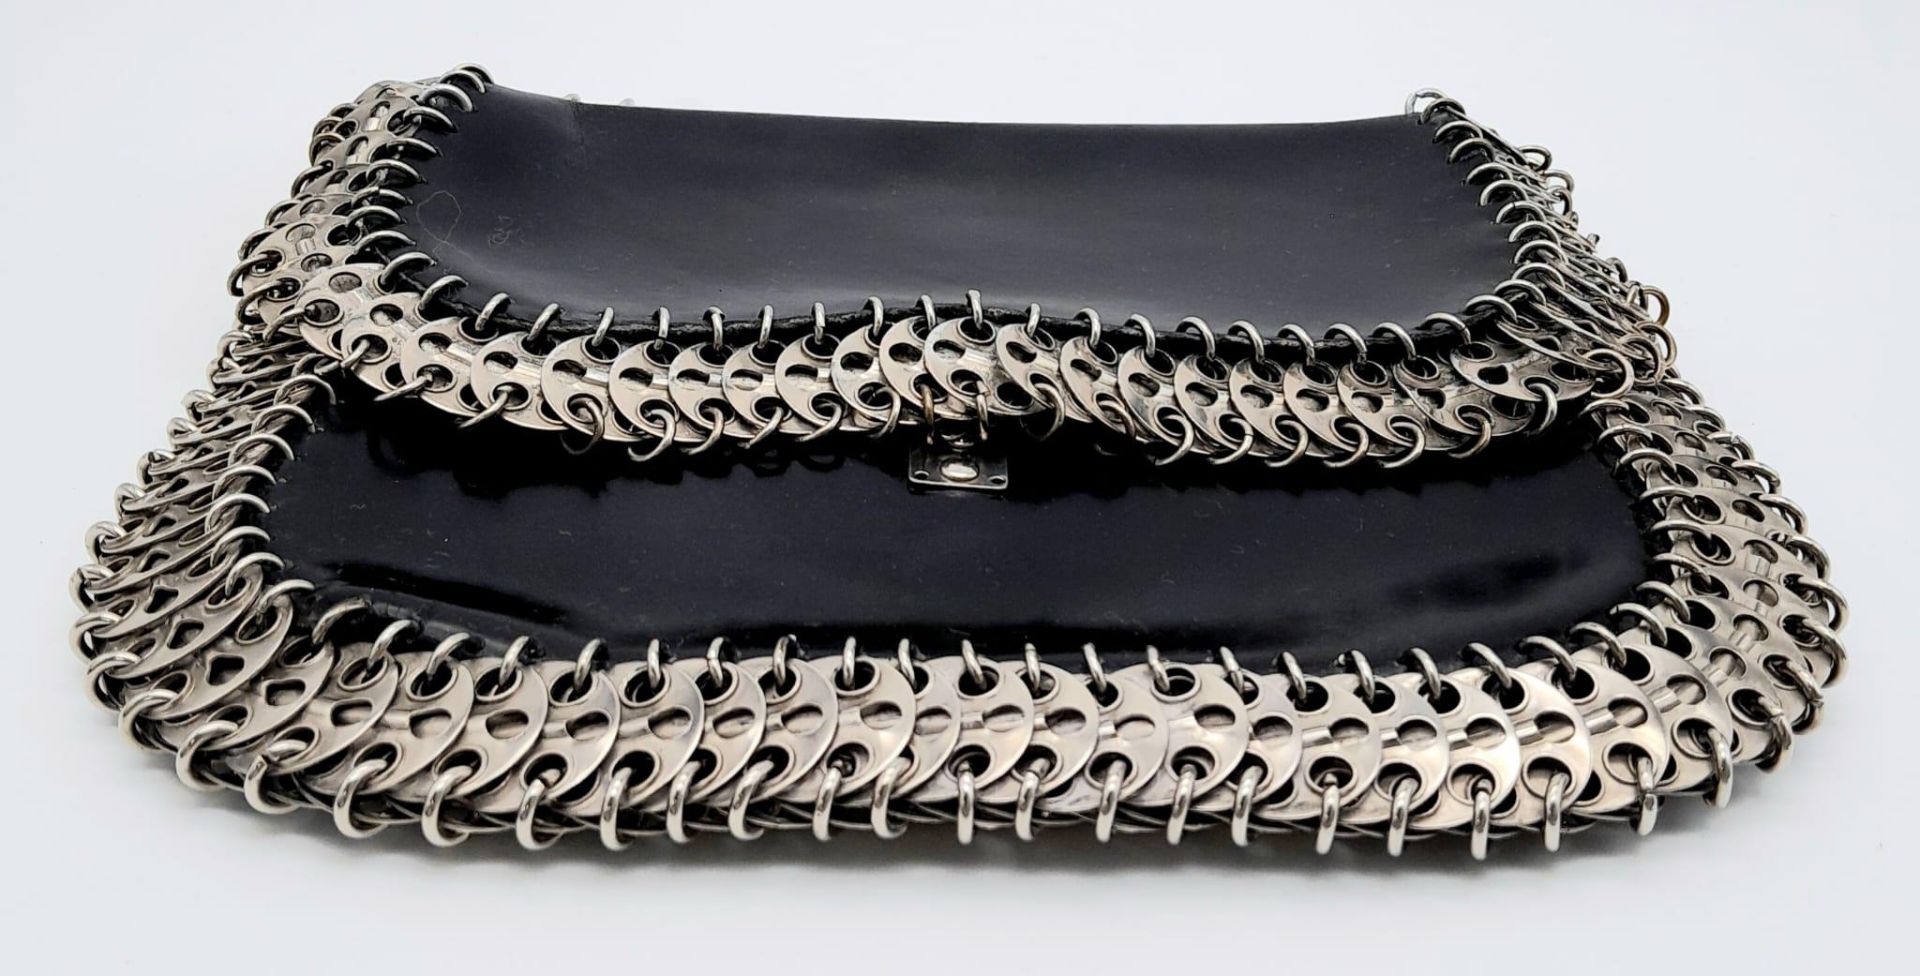 A Paco Rabanne Black 69 Chain Bag. Leather exterior with silver-toned perforated steel discs - Image 6 of 8